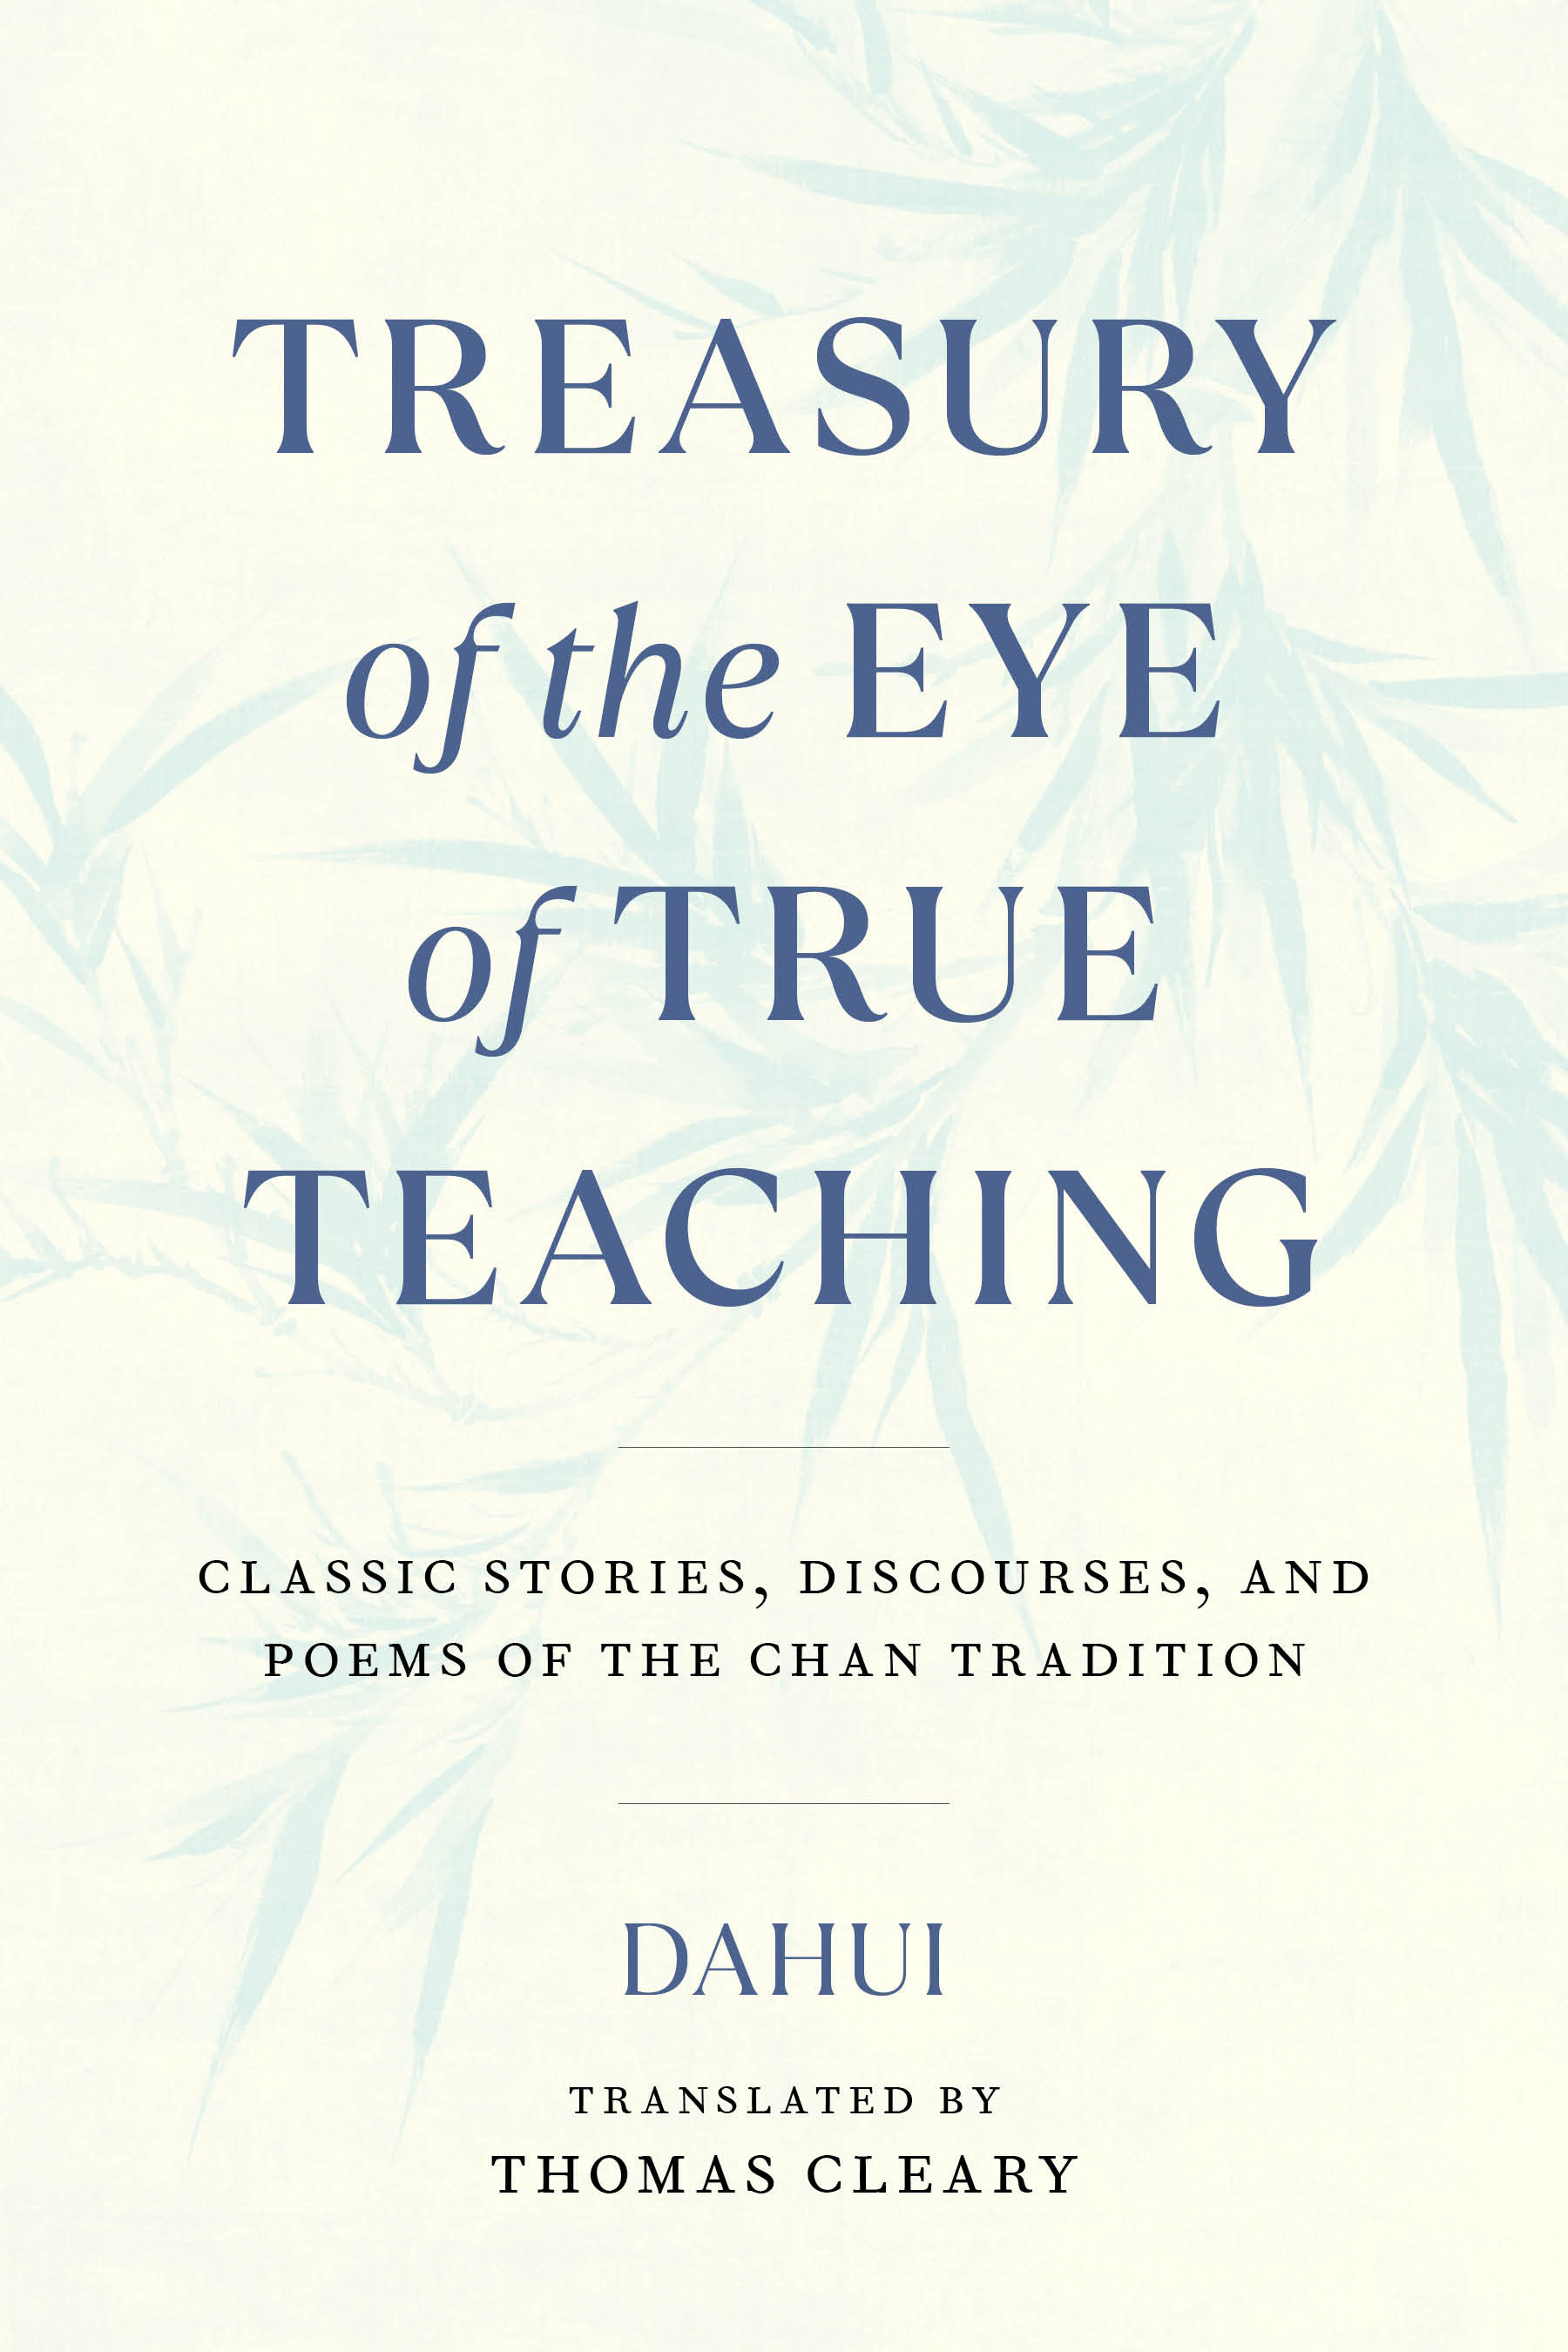 Treasury of the Eye of True Teaching : Classic Stories, Discourses, and Poems of the Chan Tradition | Dahui